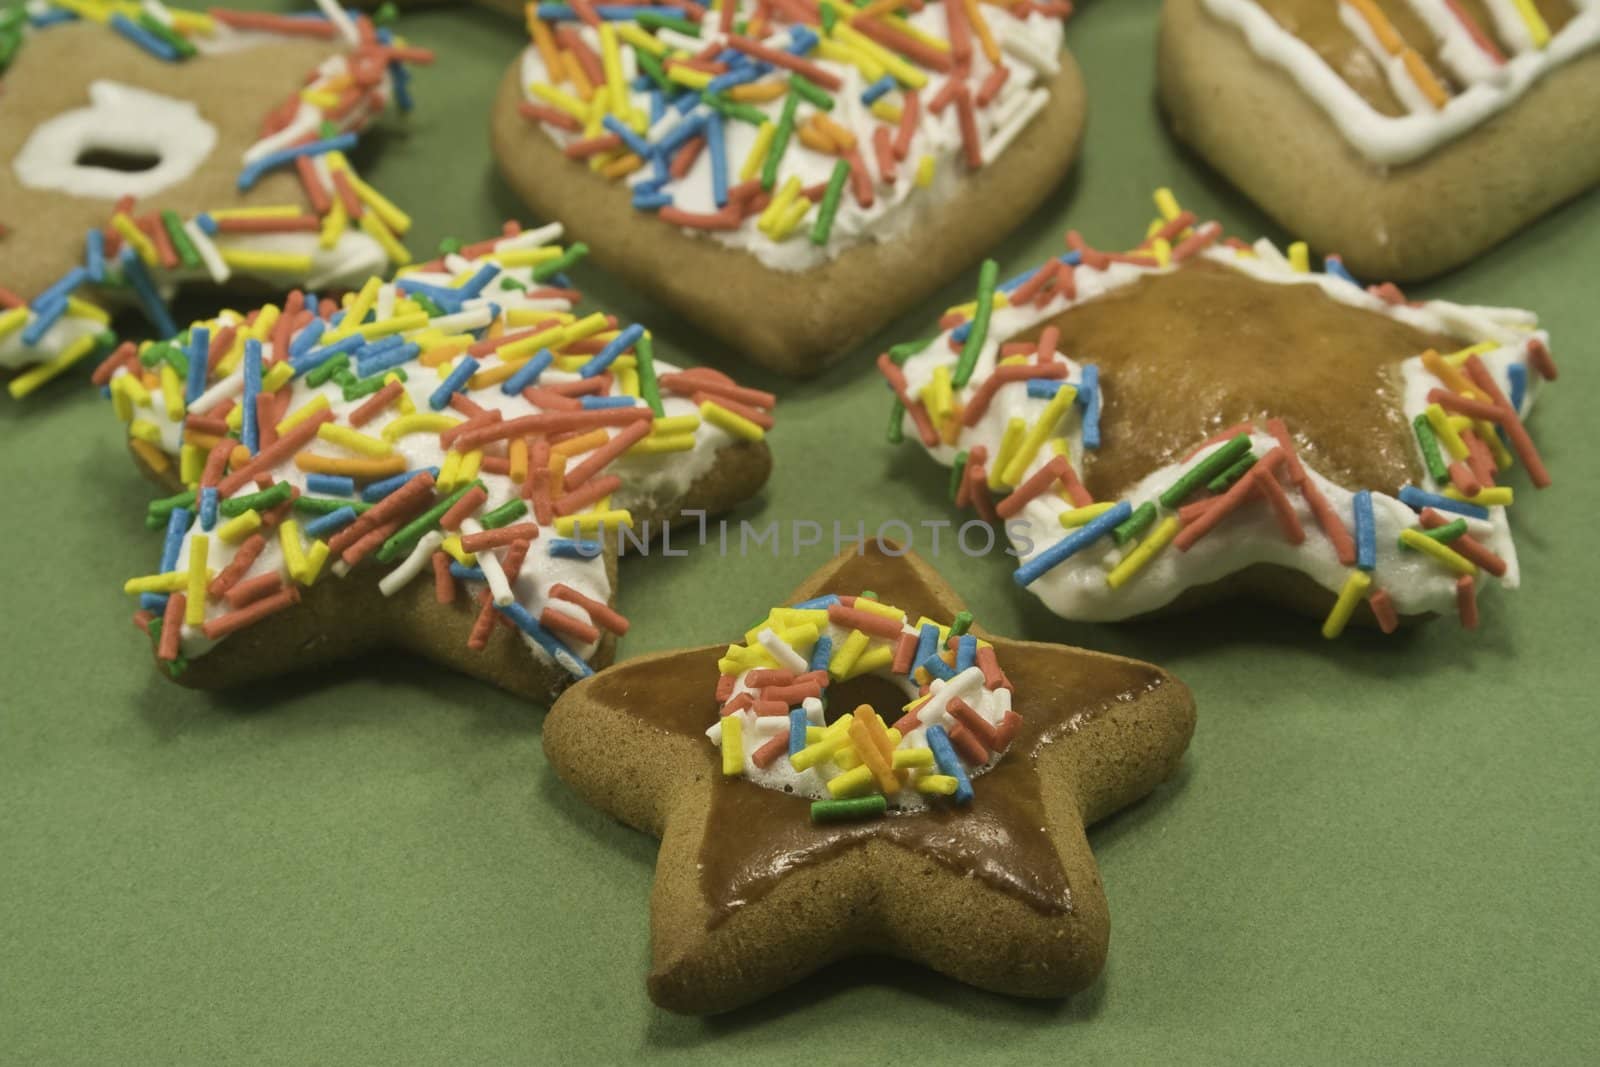 Decorated gingerbread cookies on green paper